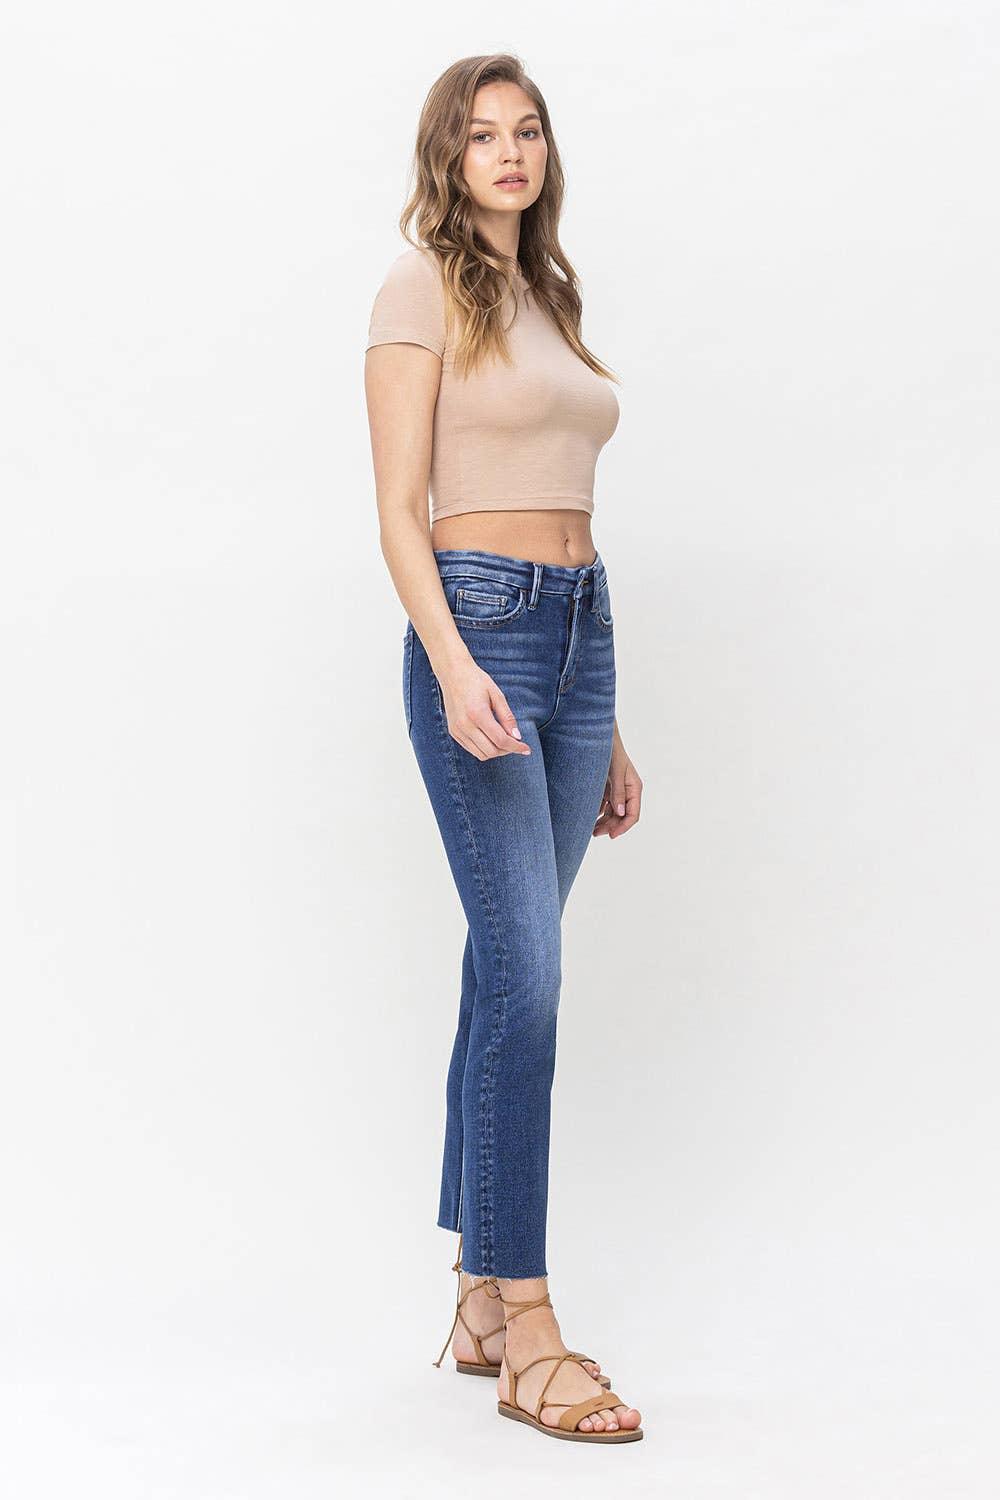 Flying Monkey By Vervet Slim Straight Jeans - Strawberry Moon Boutique